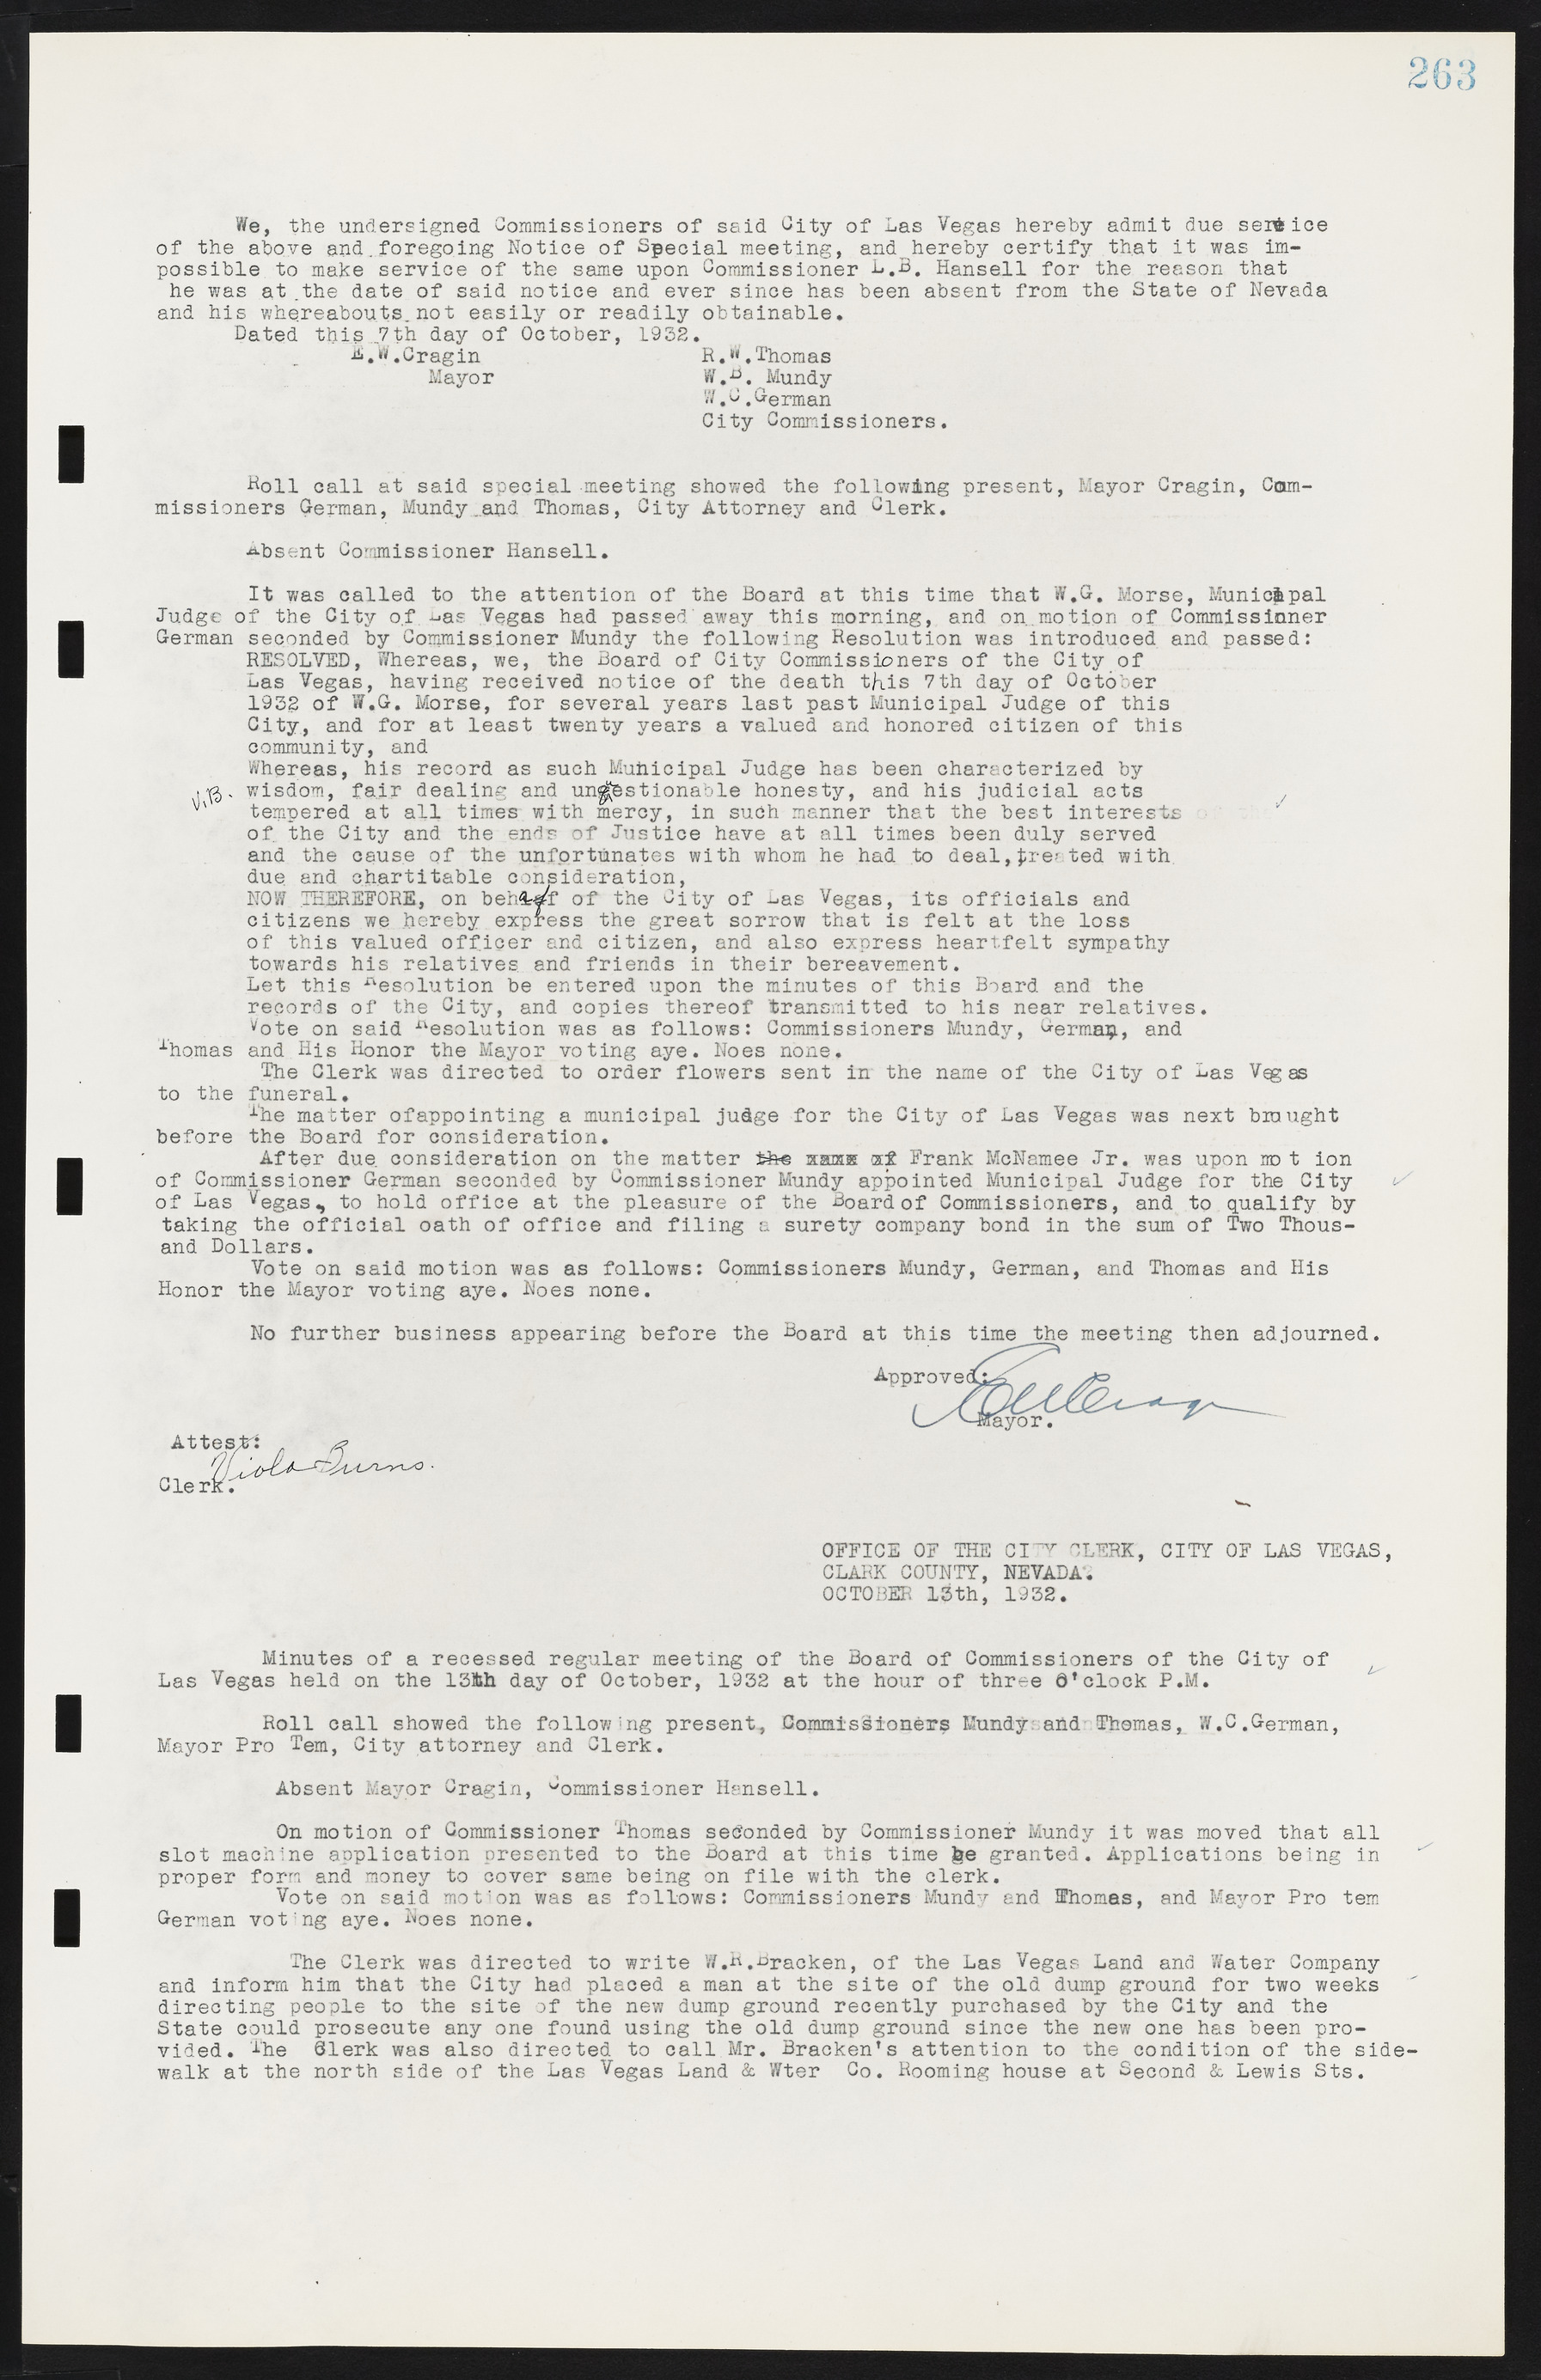 Las Vegas City Commission Minutes, May 14, 1929 to February 11, 1937, lvc000003-269